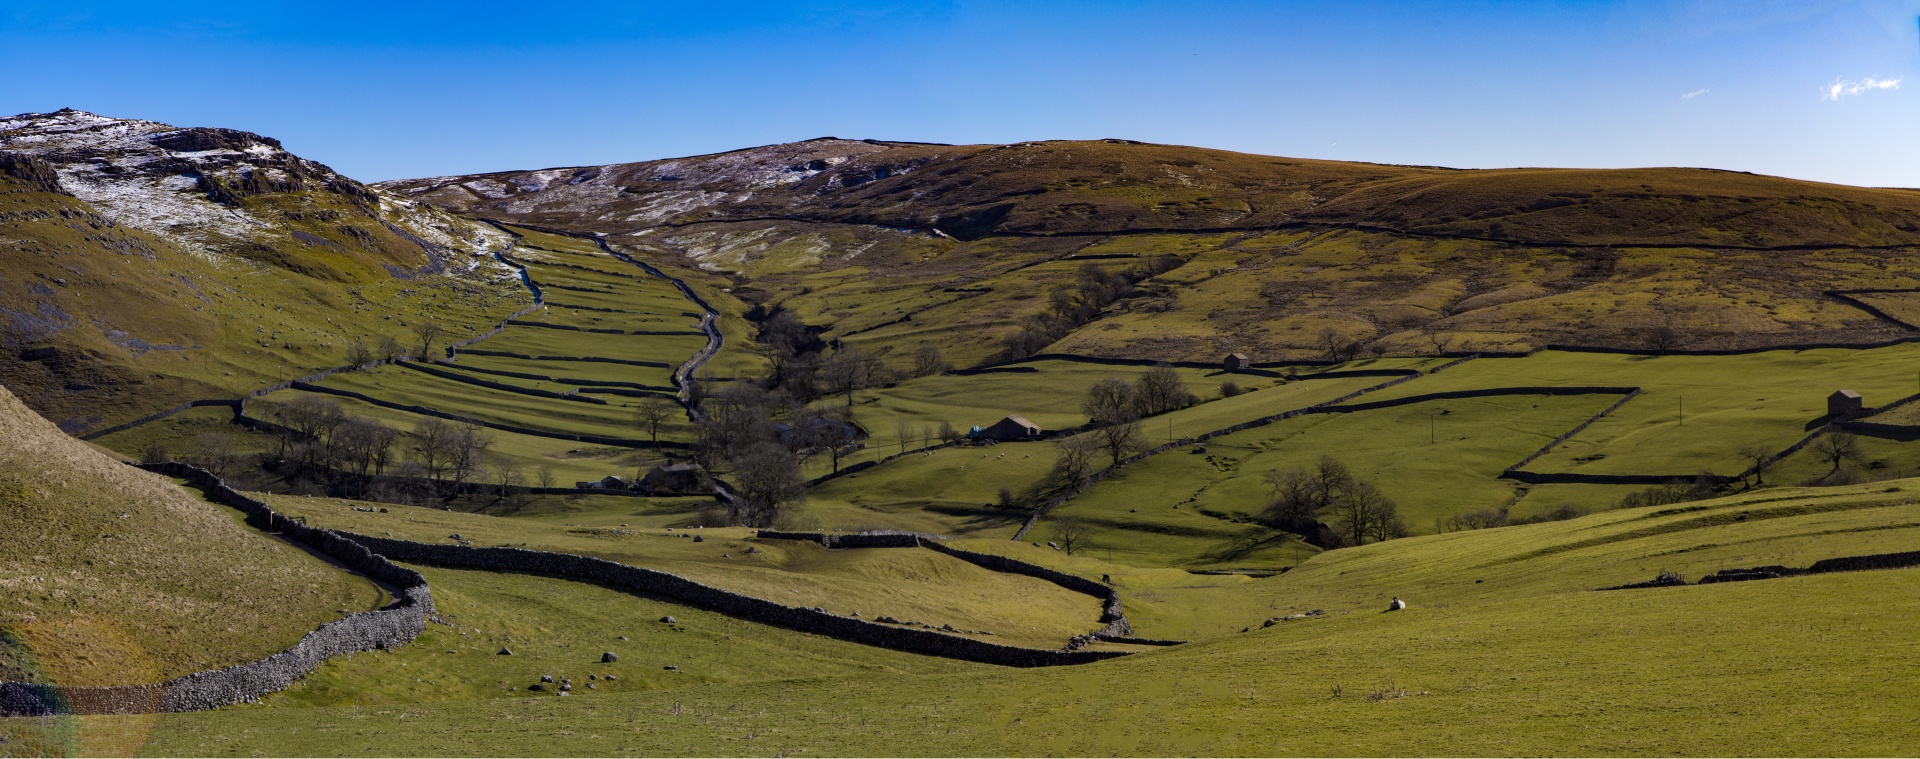 cove dales fields free photo